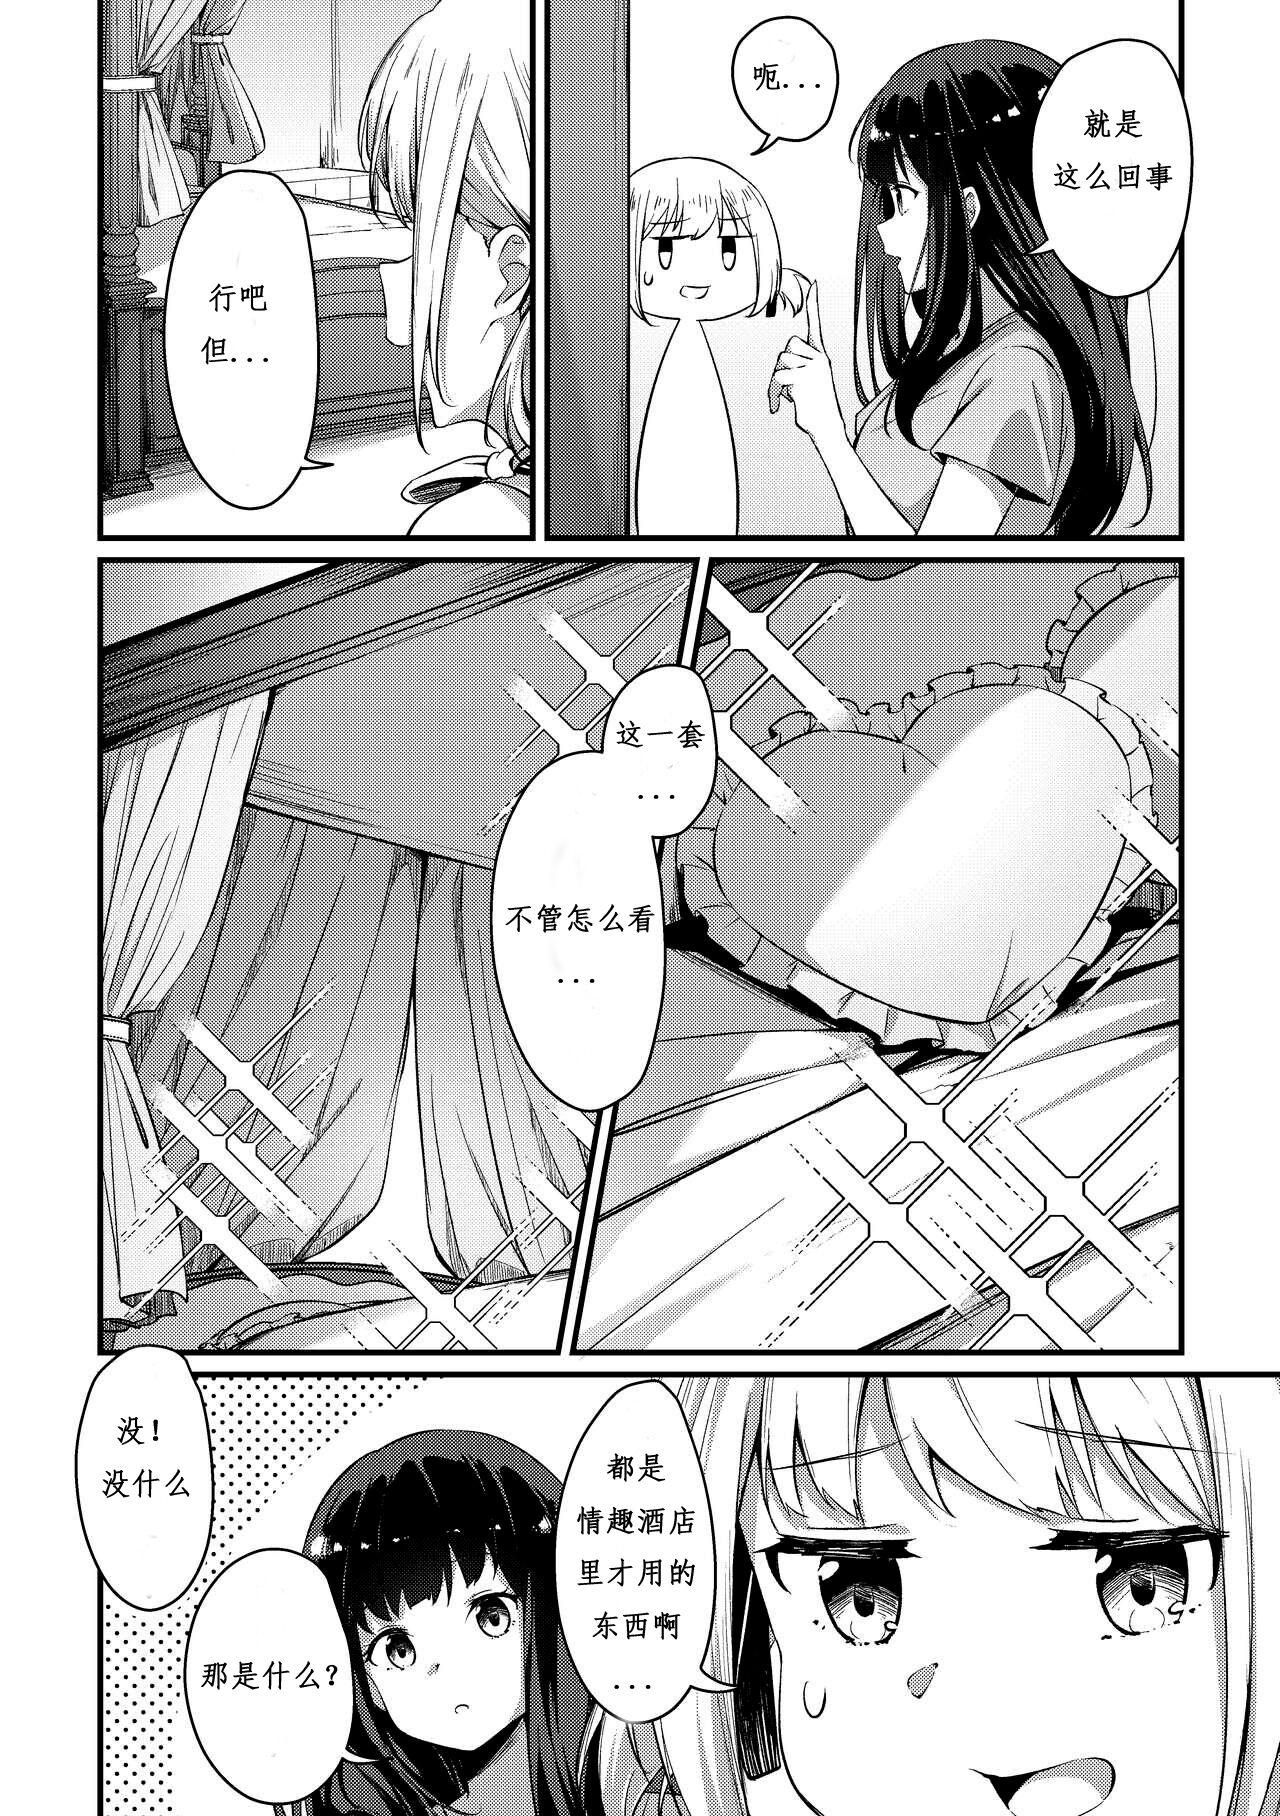 Swing Record & Recording - Lycoris recoil Short - Page 7